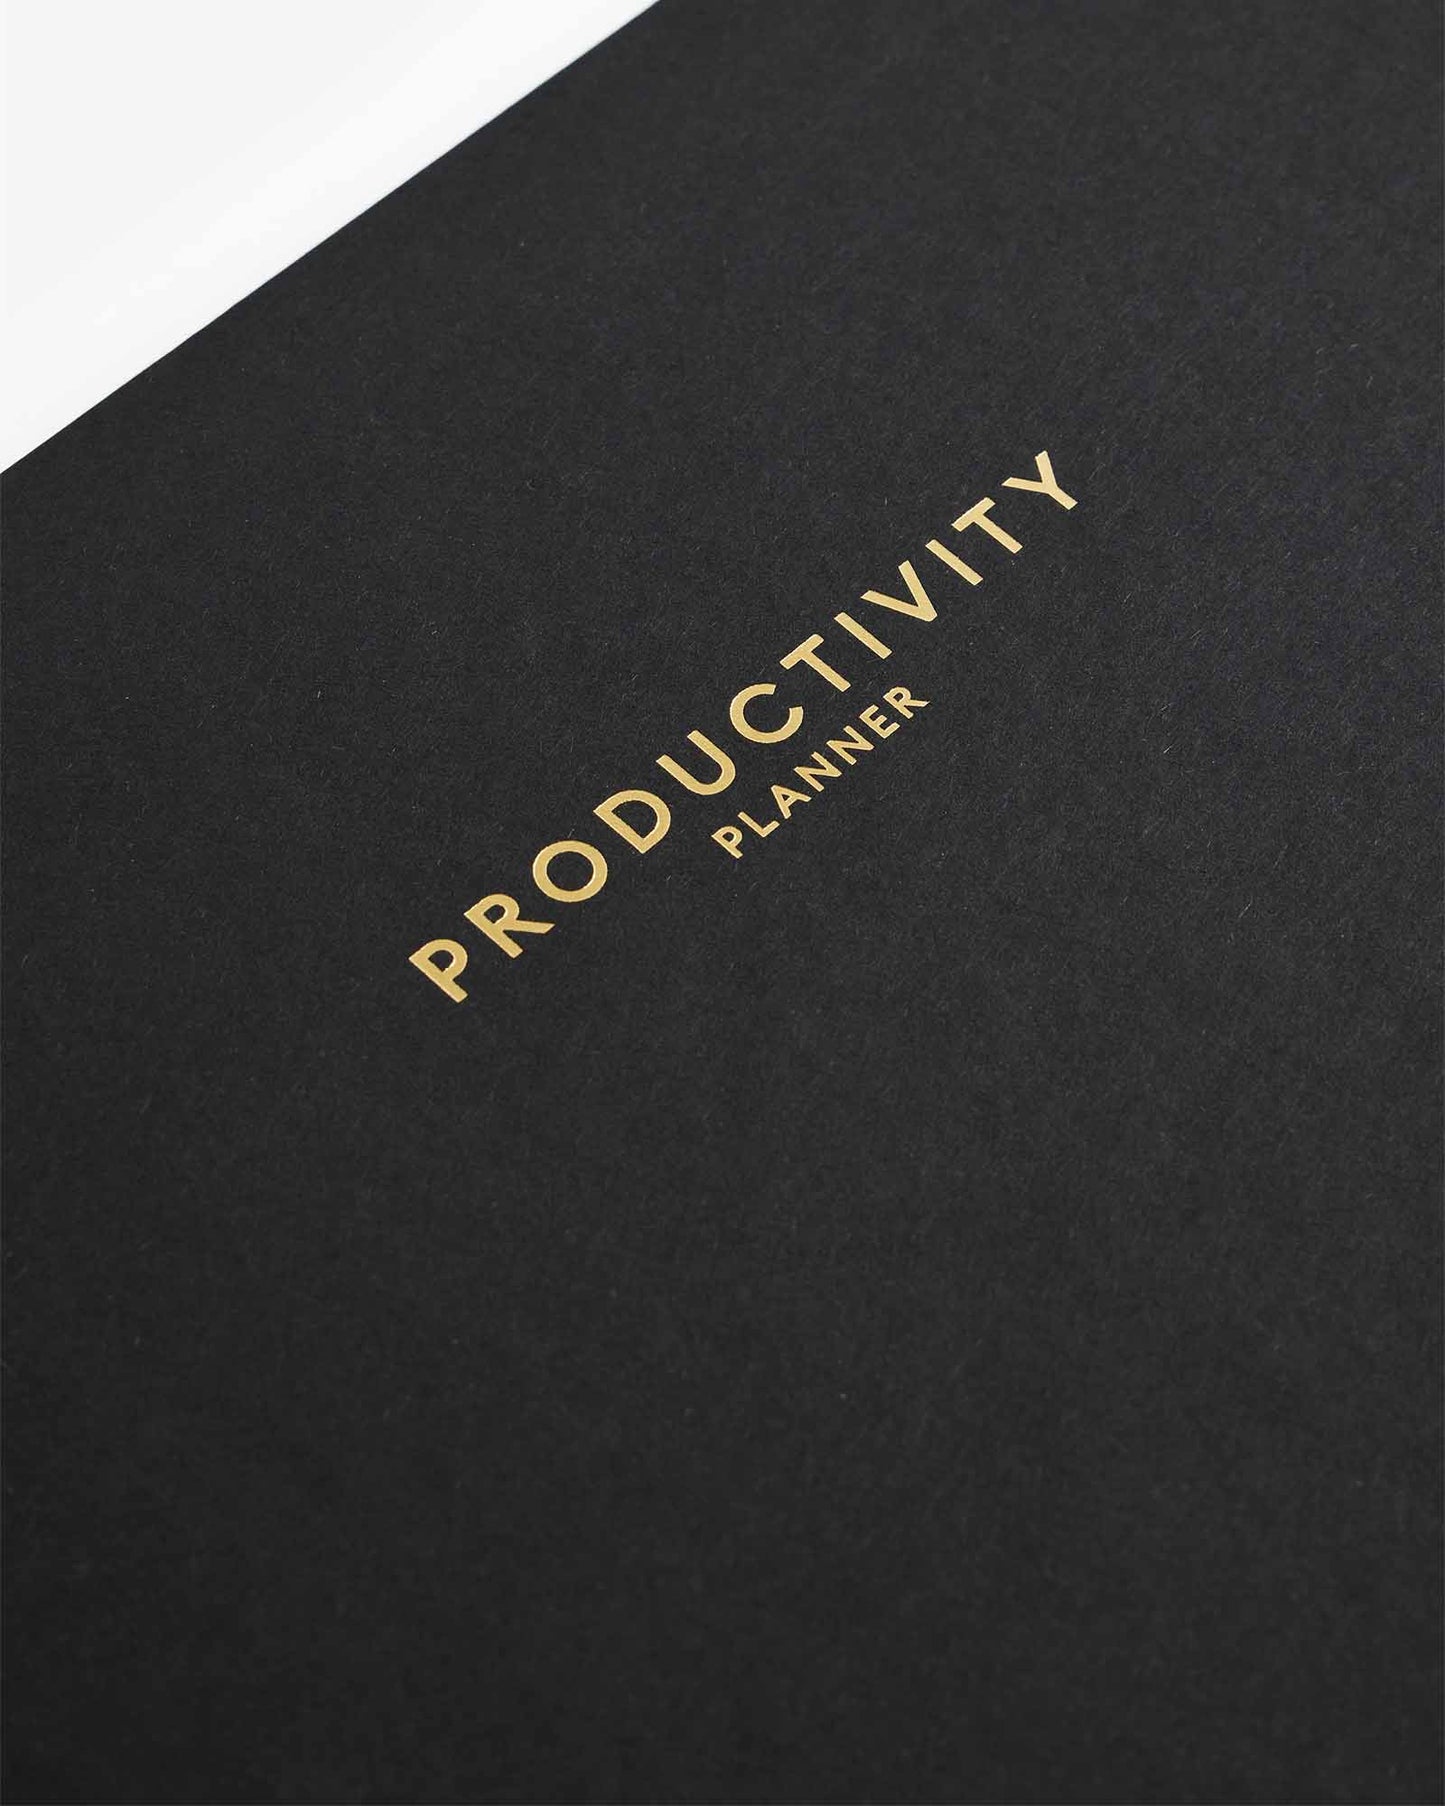 Productivity Daily Desk Pad by Intelligent Change